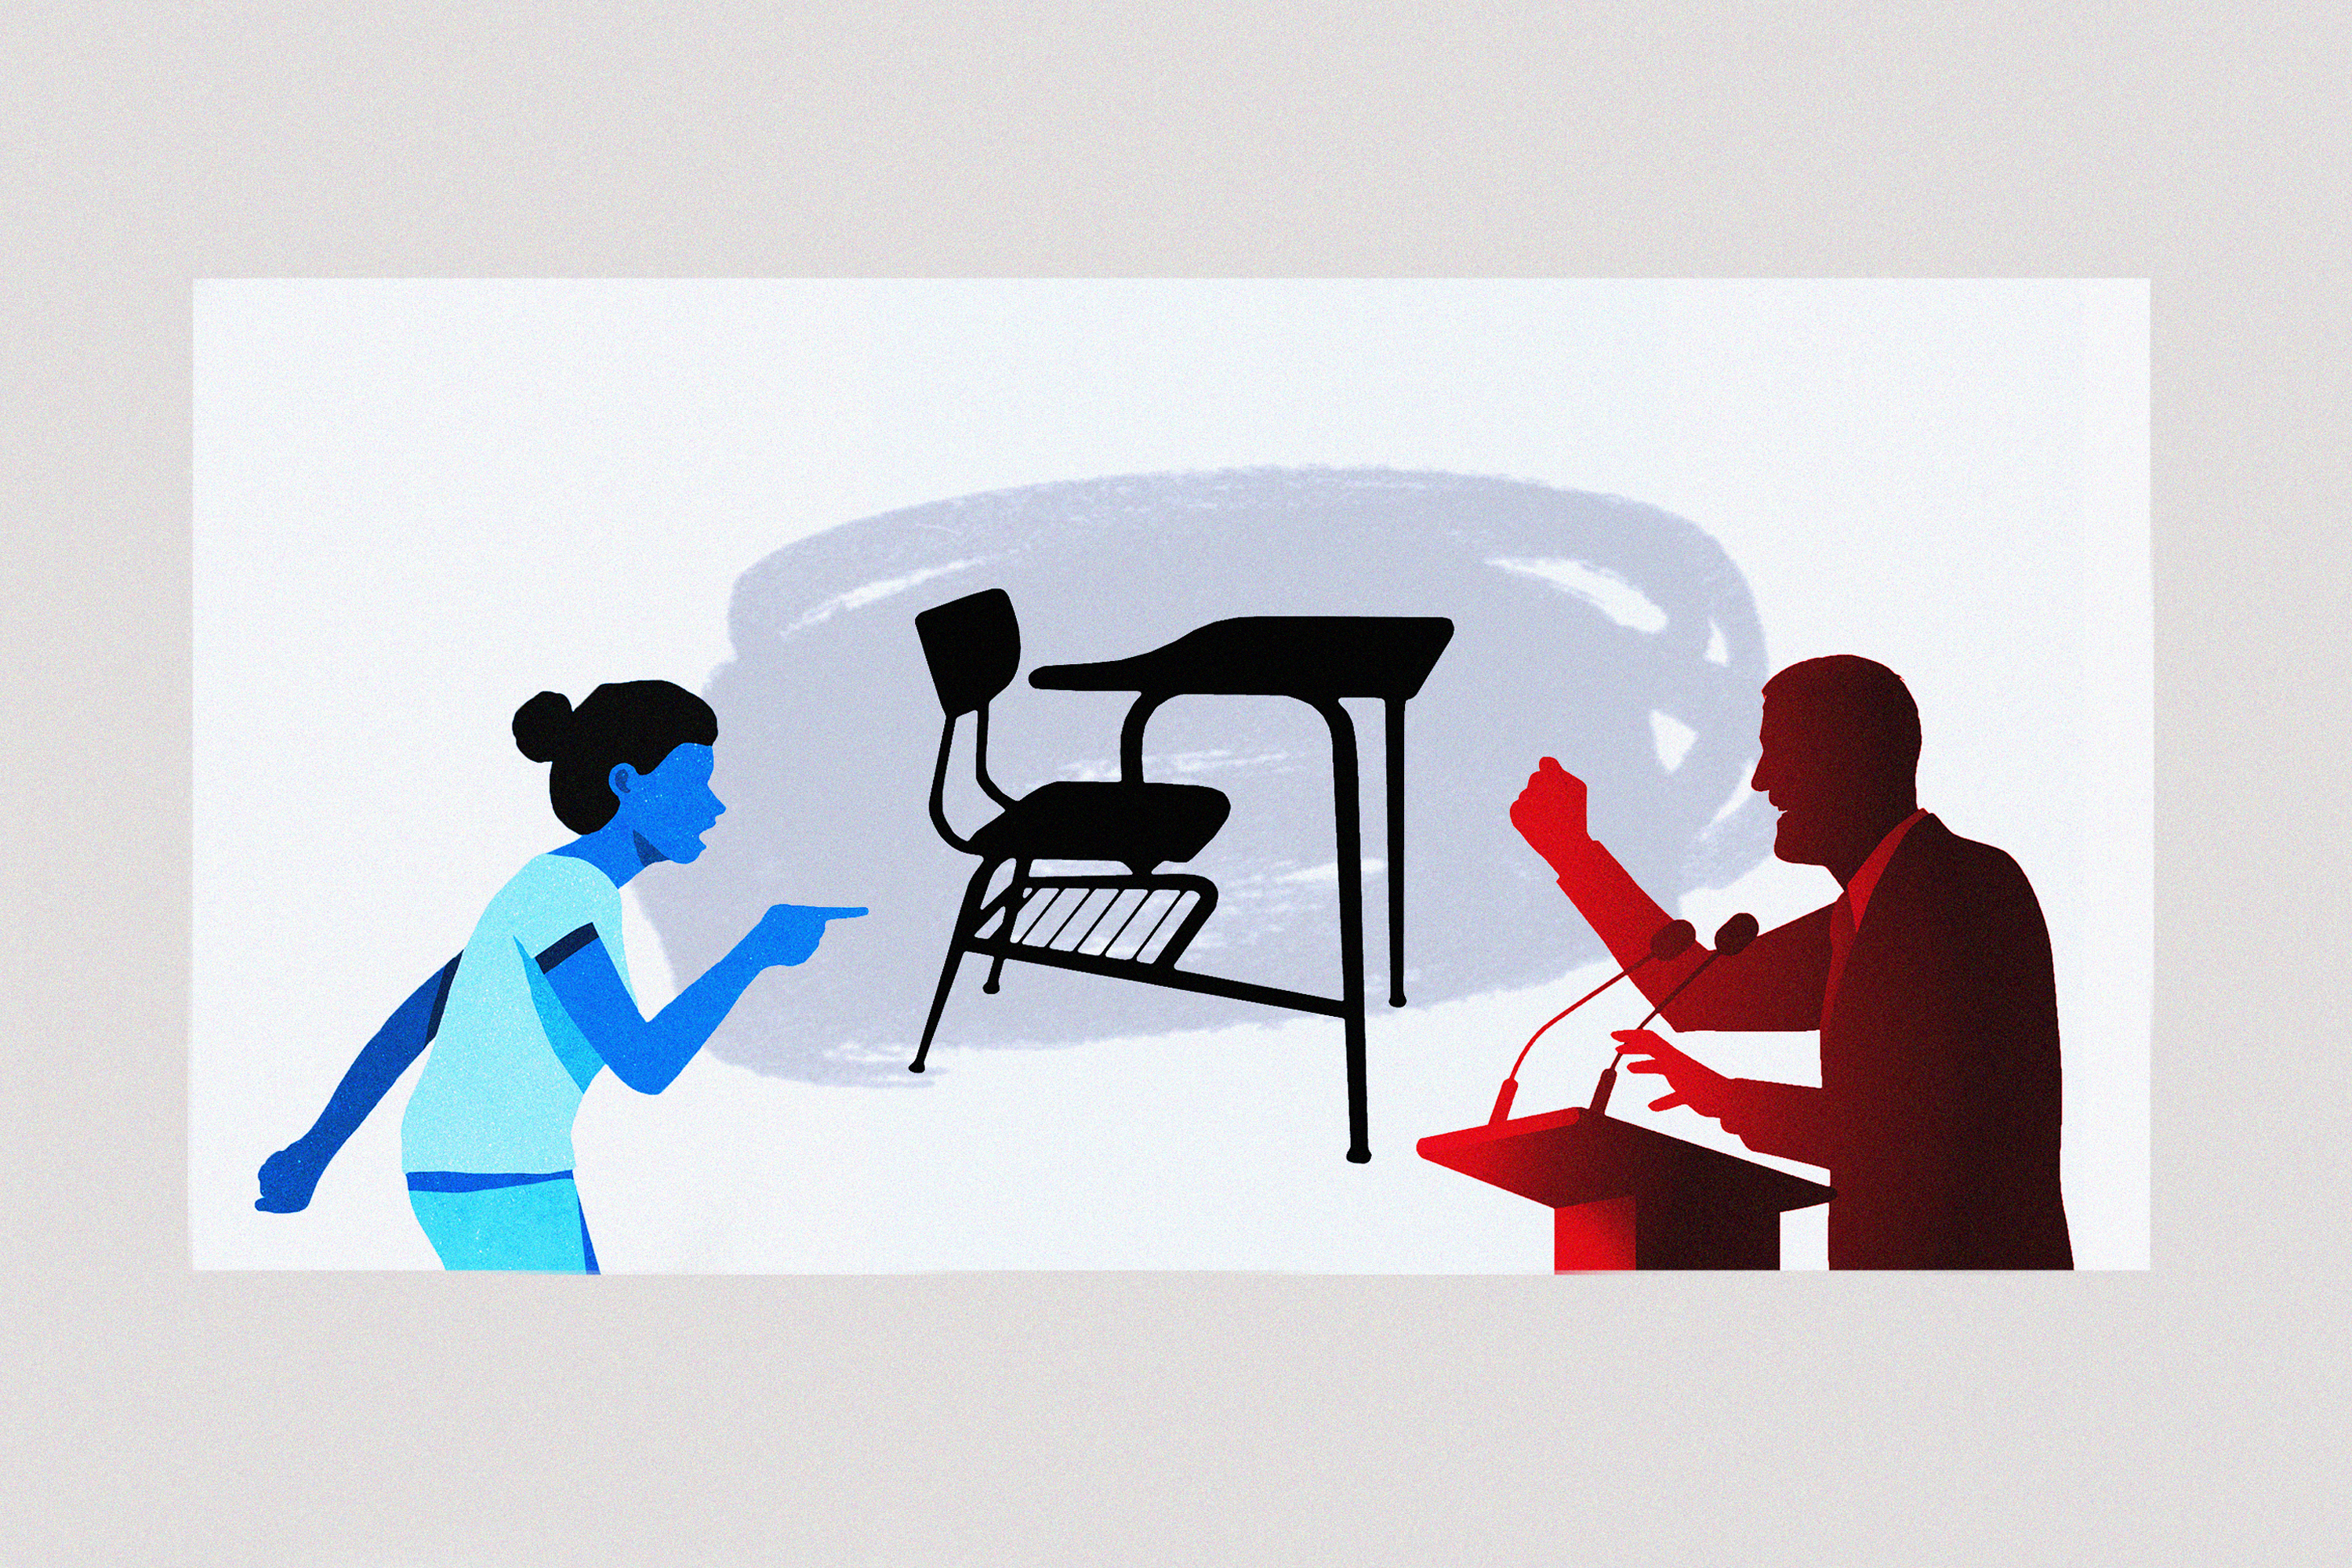 An illustration shows a school desk and chair, with a woman in blue on the left, arguing with a man at a podium in red on the right.